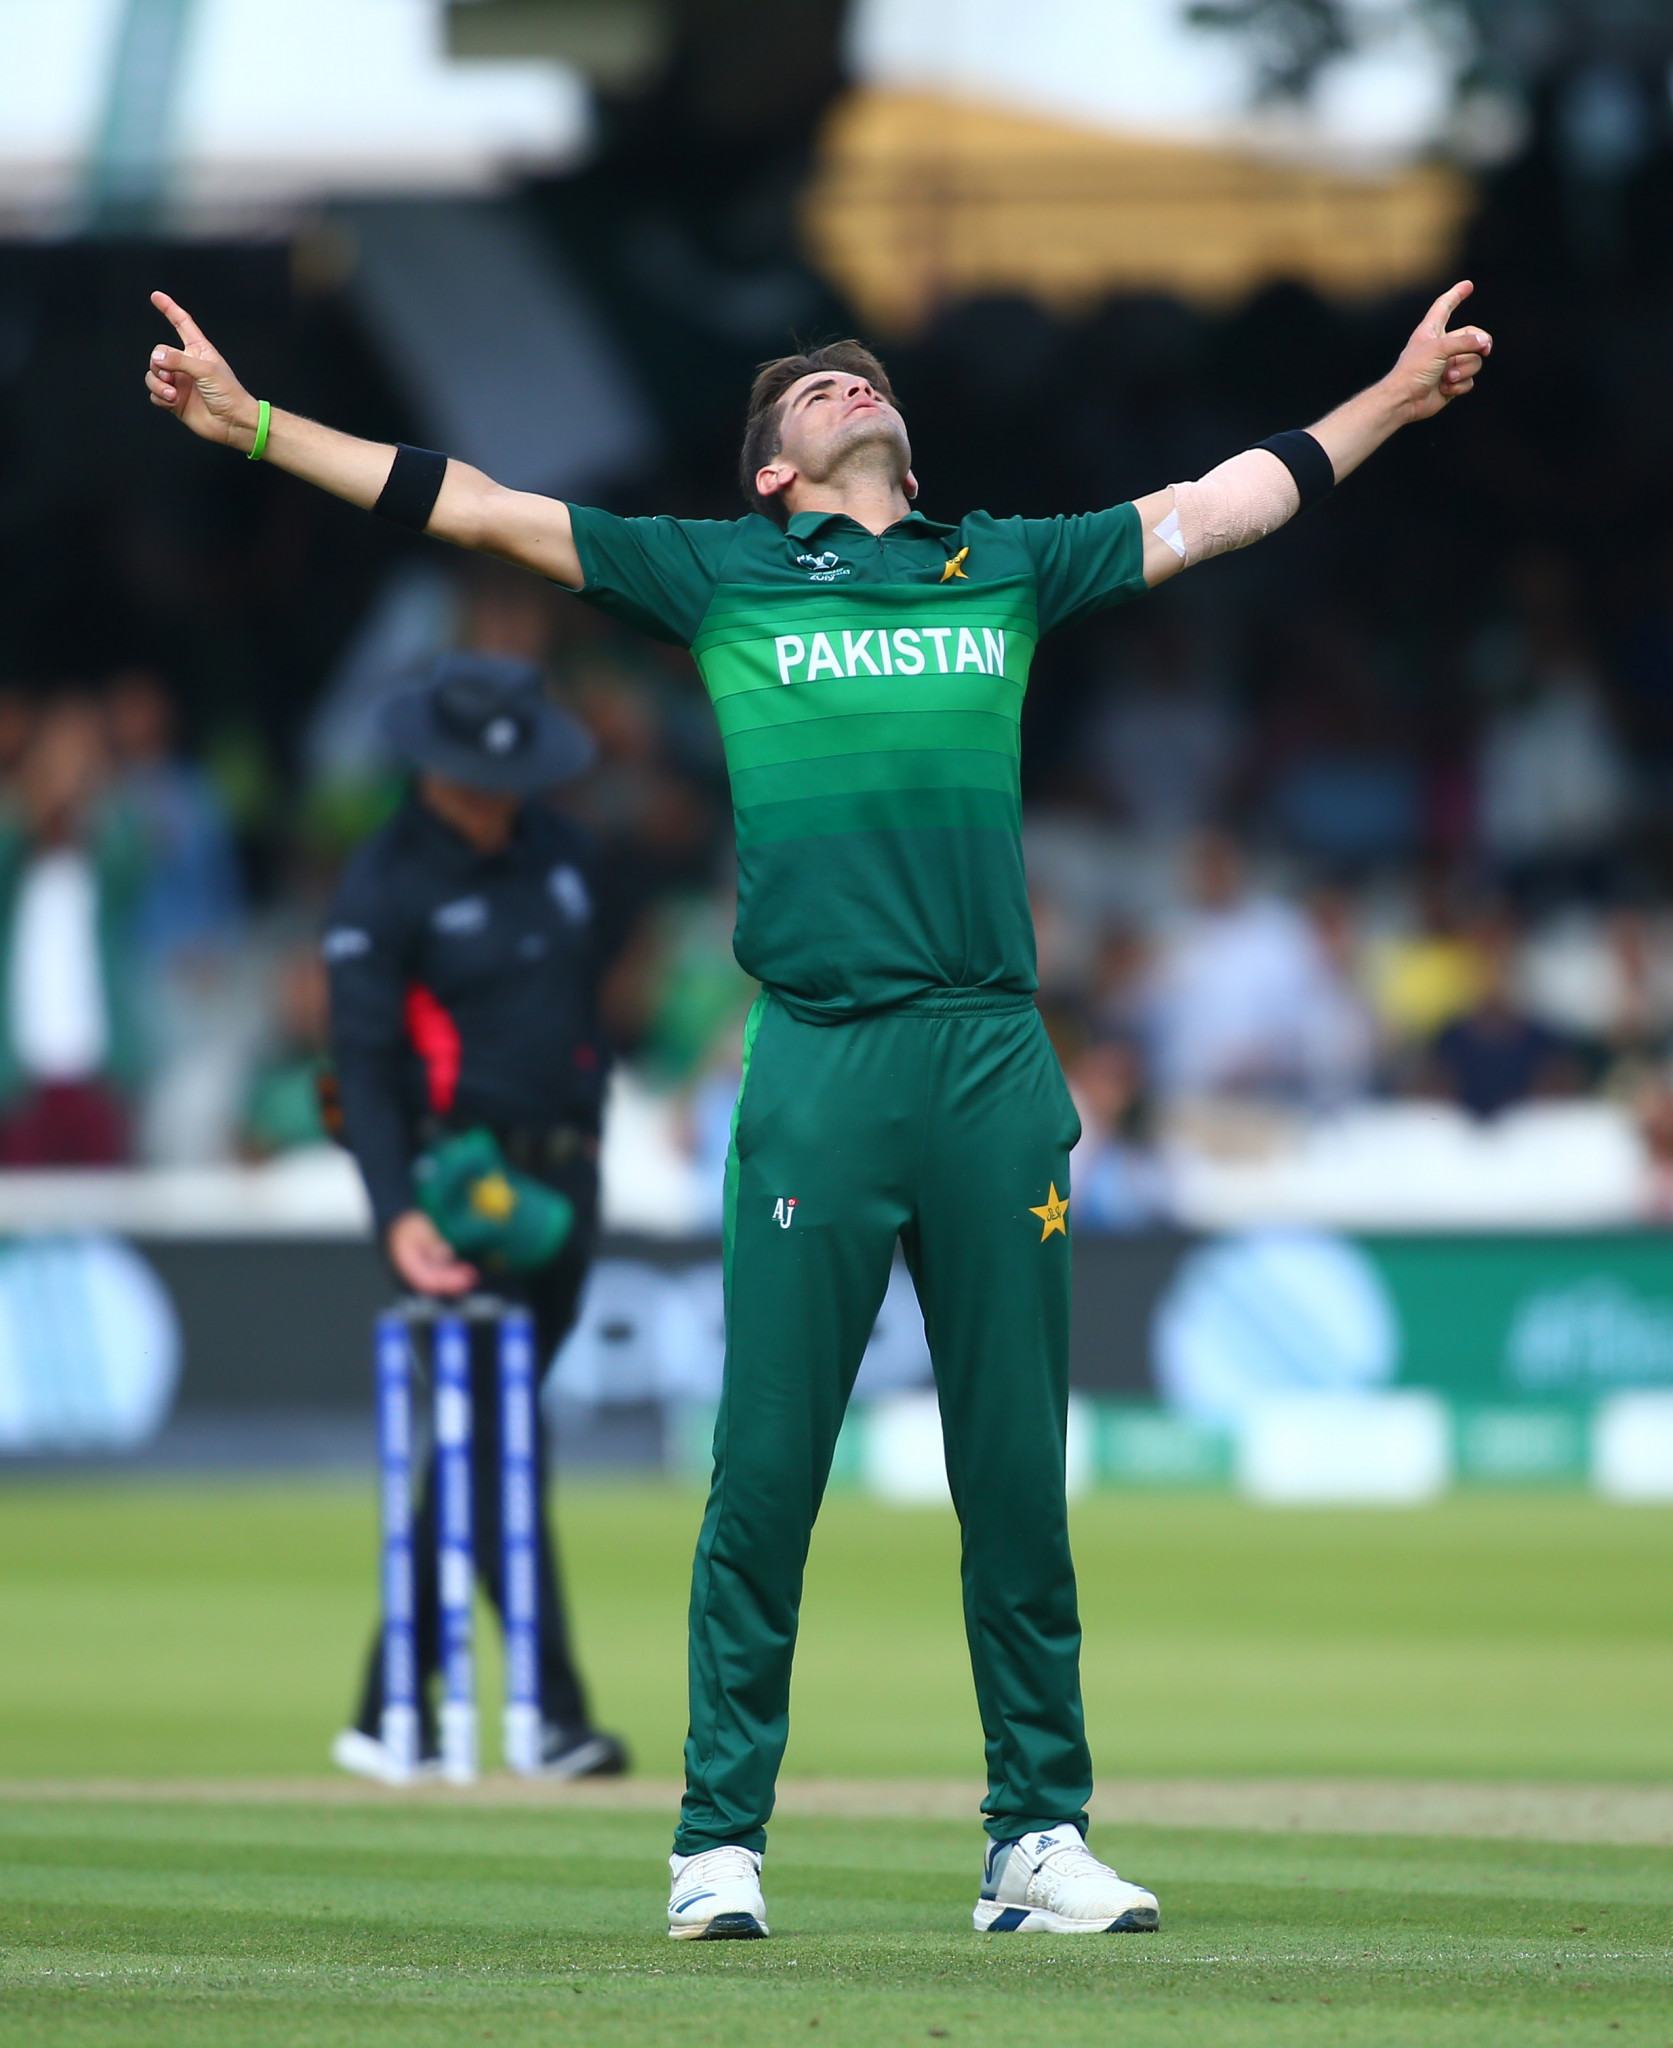 Pakistan's 19-year-old Shaheen Afridi took 6-35 – the best figures so far in the ICC Cricket World Cup – as his side bowed out with a win against Bangladesh at Lord's ©Getty Images